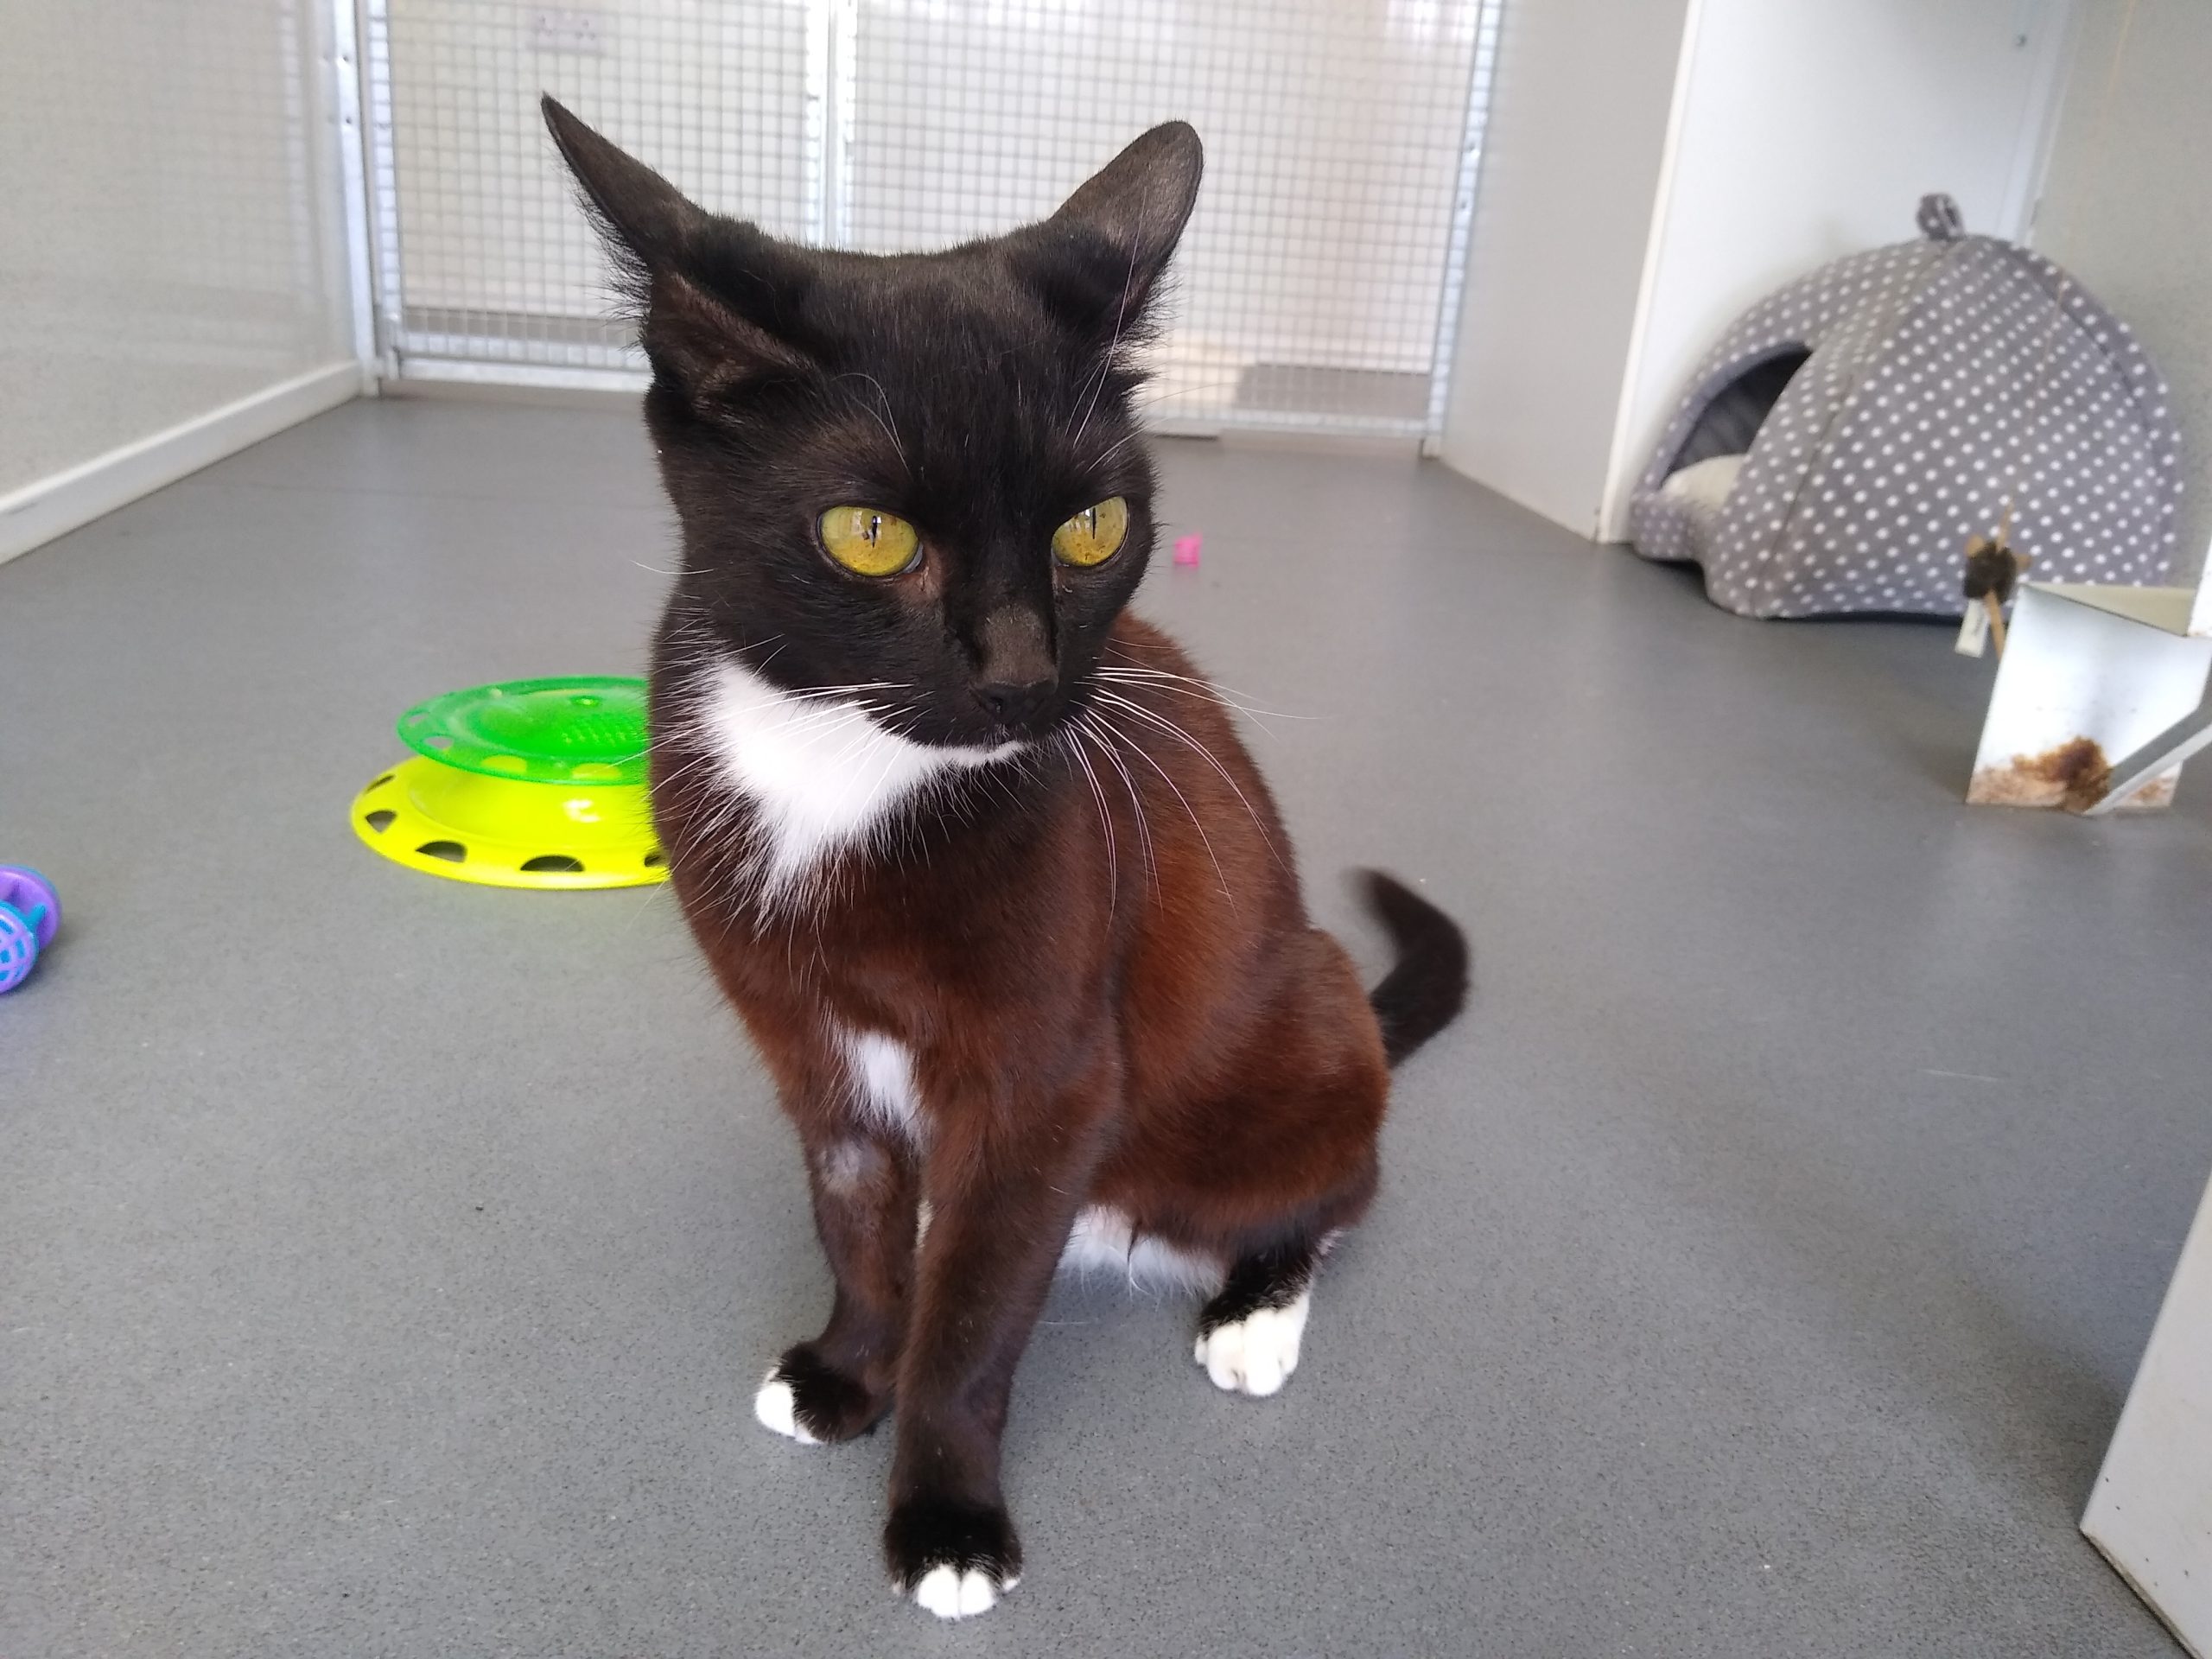 BRITAIN'S most unwanted cat is marooned in a rescue centre - after not a single person offered her a home.